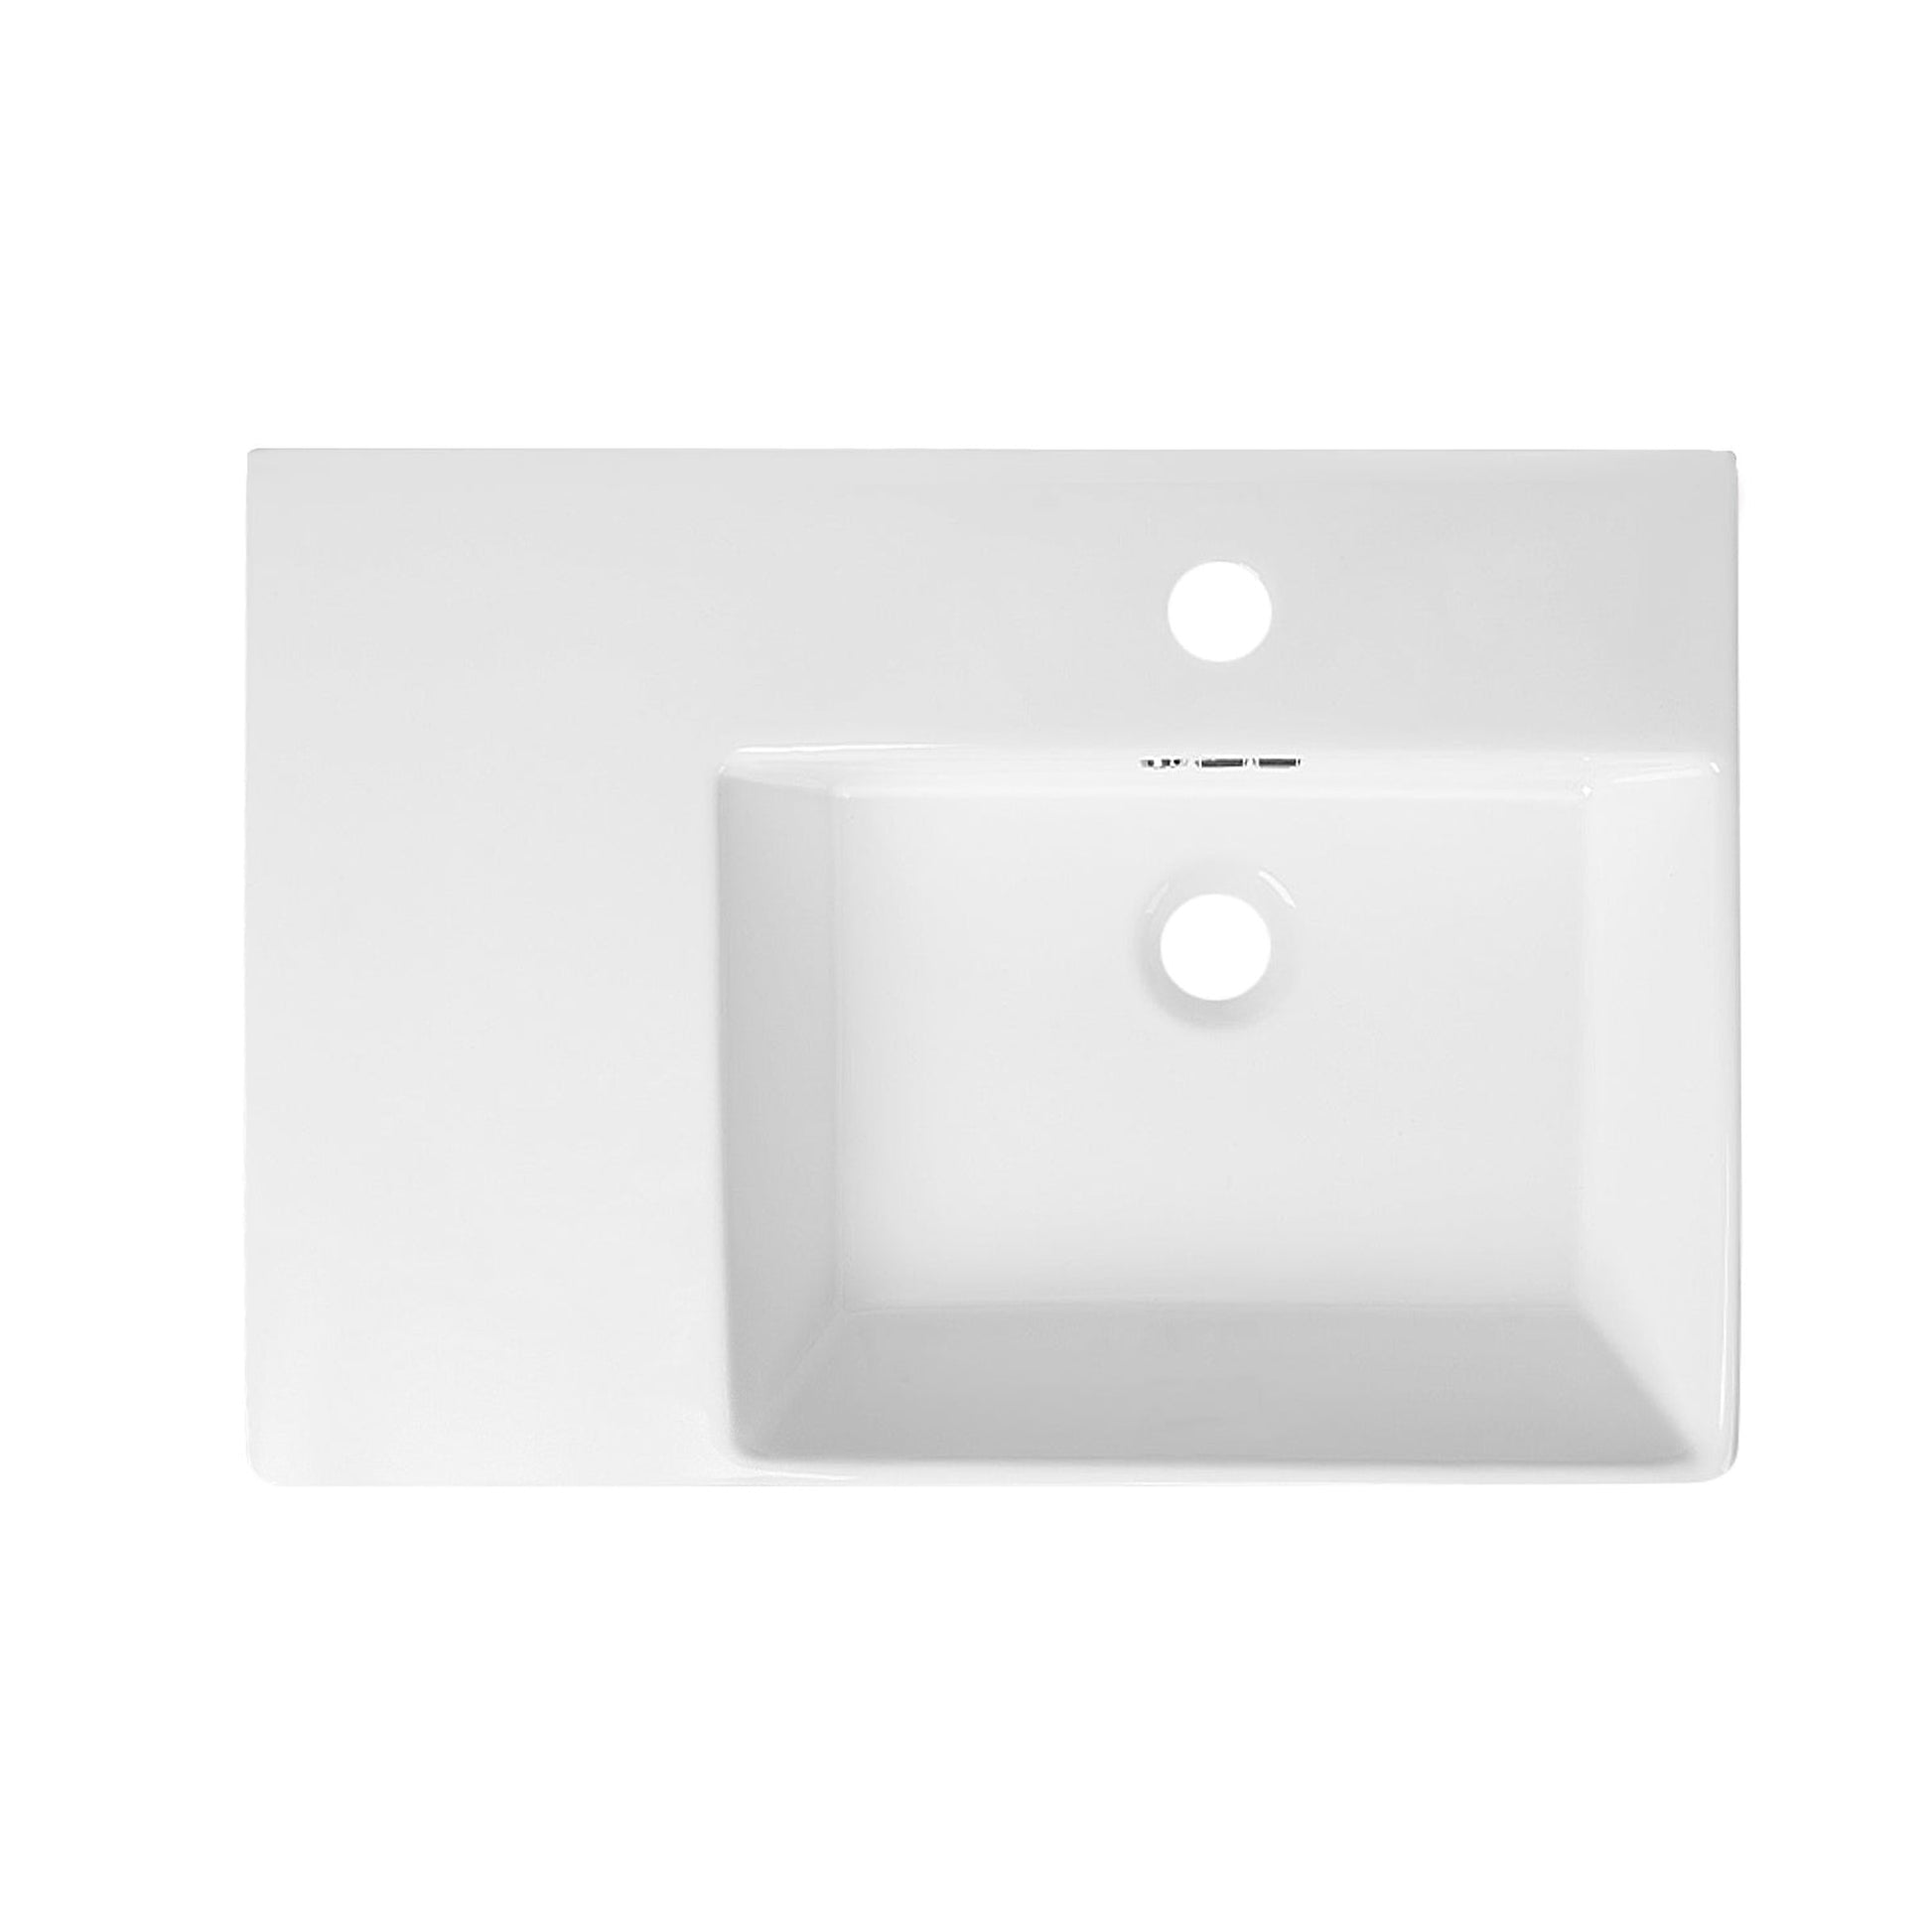 DeerValley 17" Rectangular White Right Offset Wall-Mounted Bathroom Sink With Overflow Holes